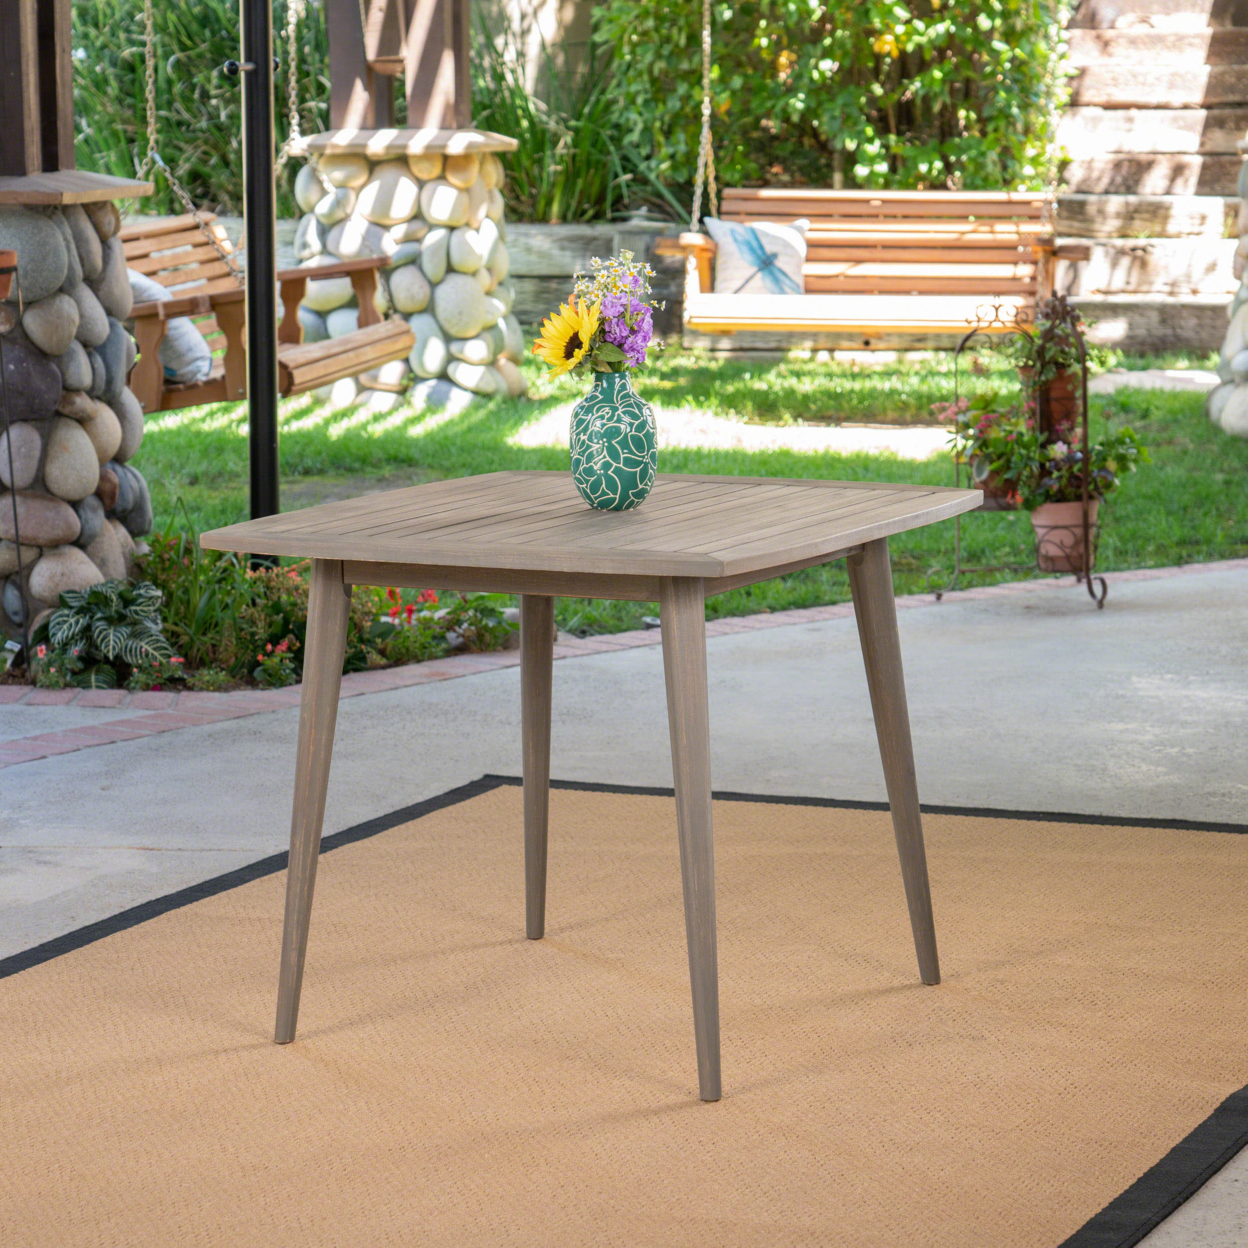 Stanford Outdoor Square Acacia Wood Dining Table With Straight Legs - Teak